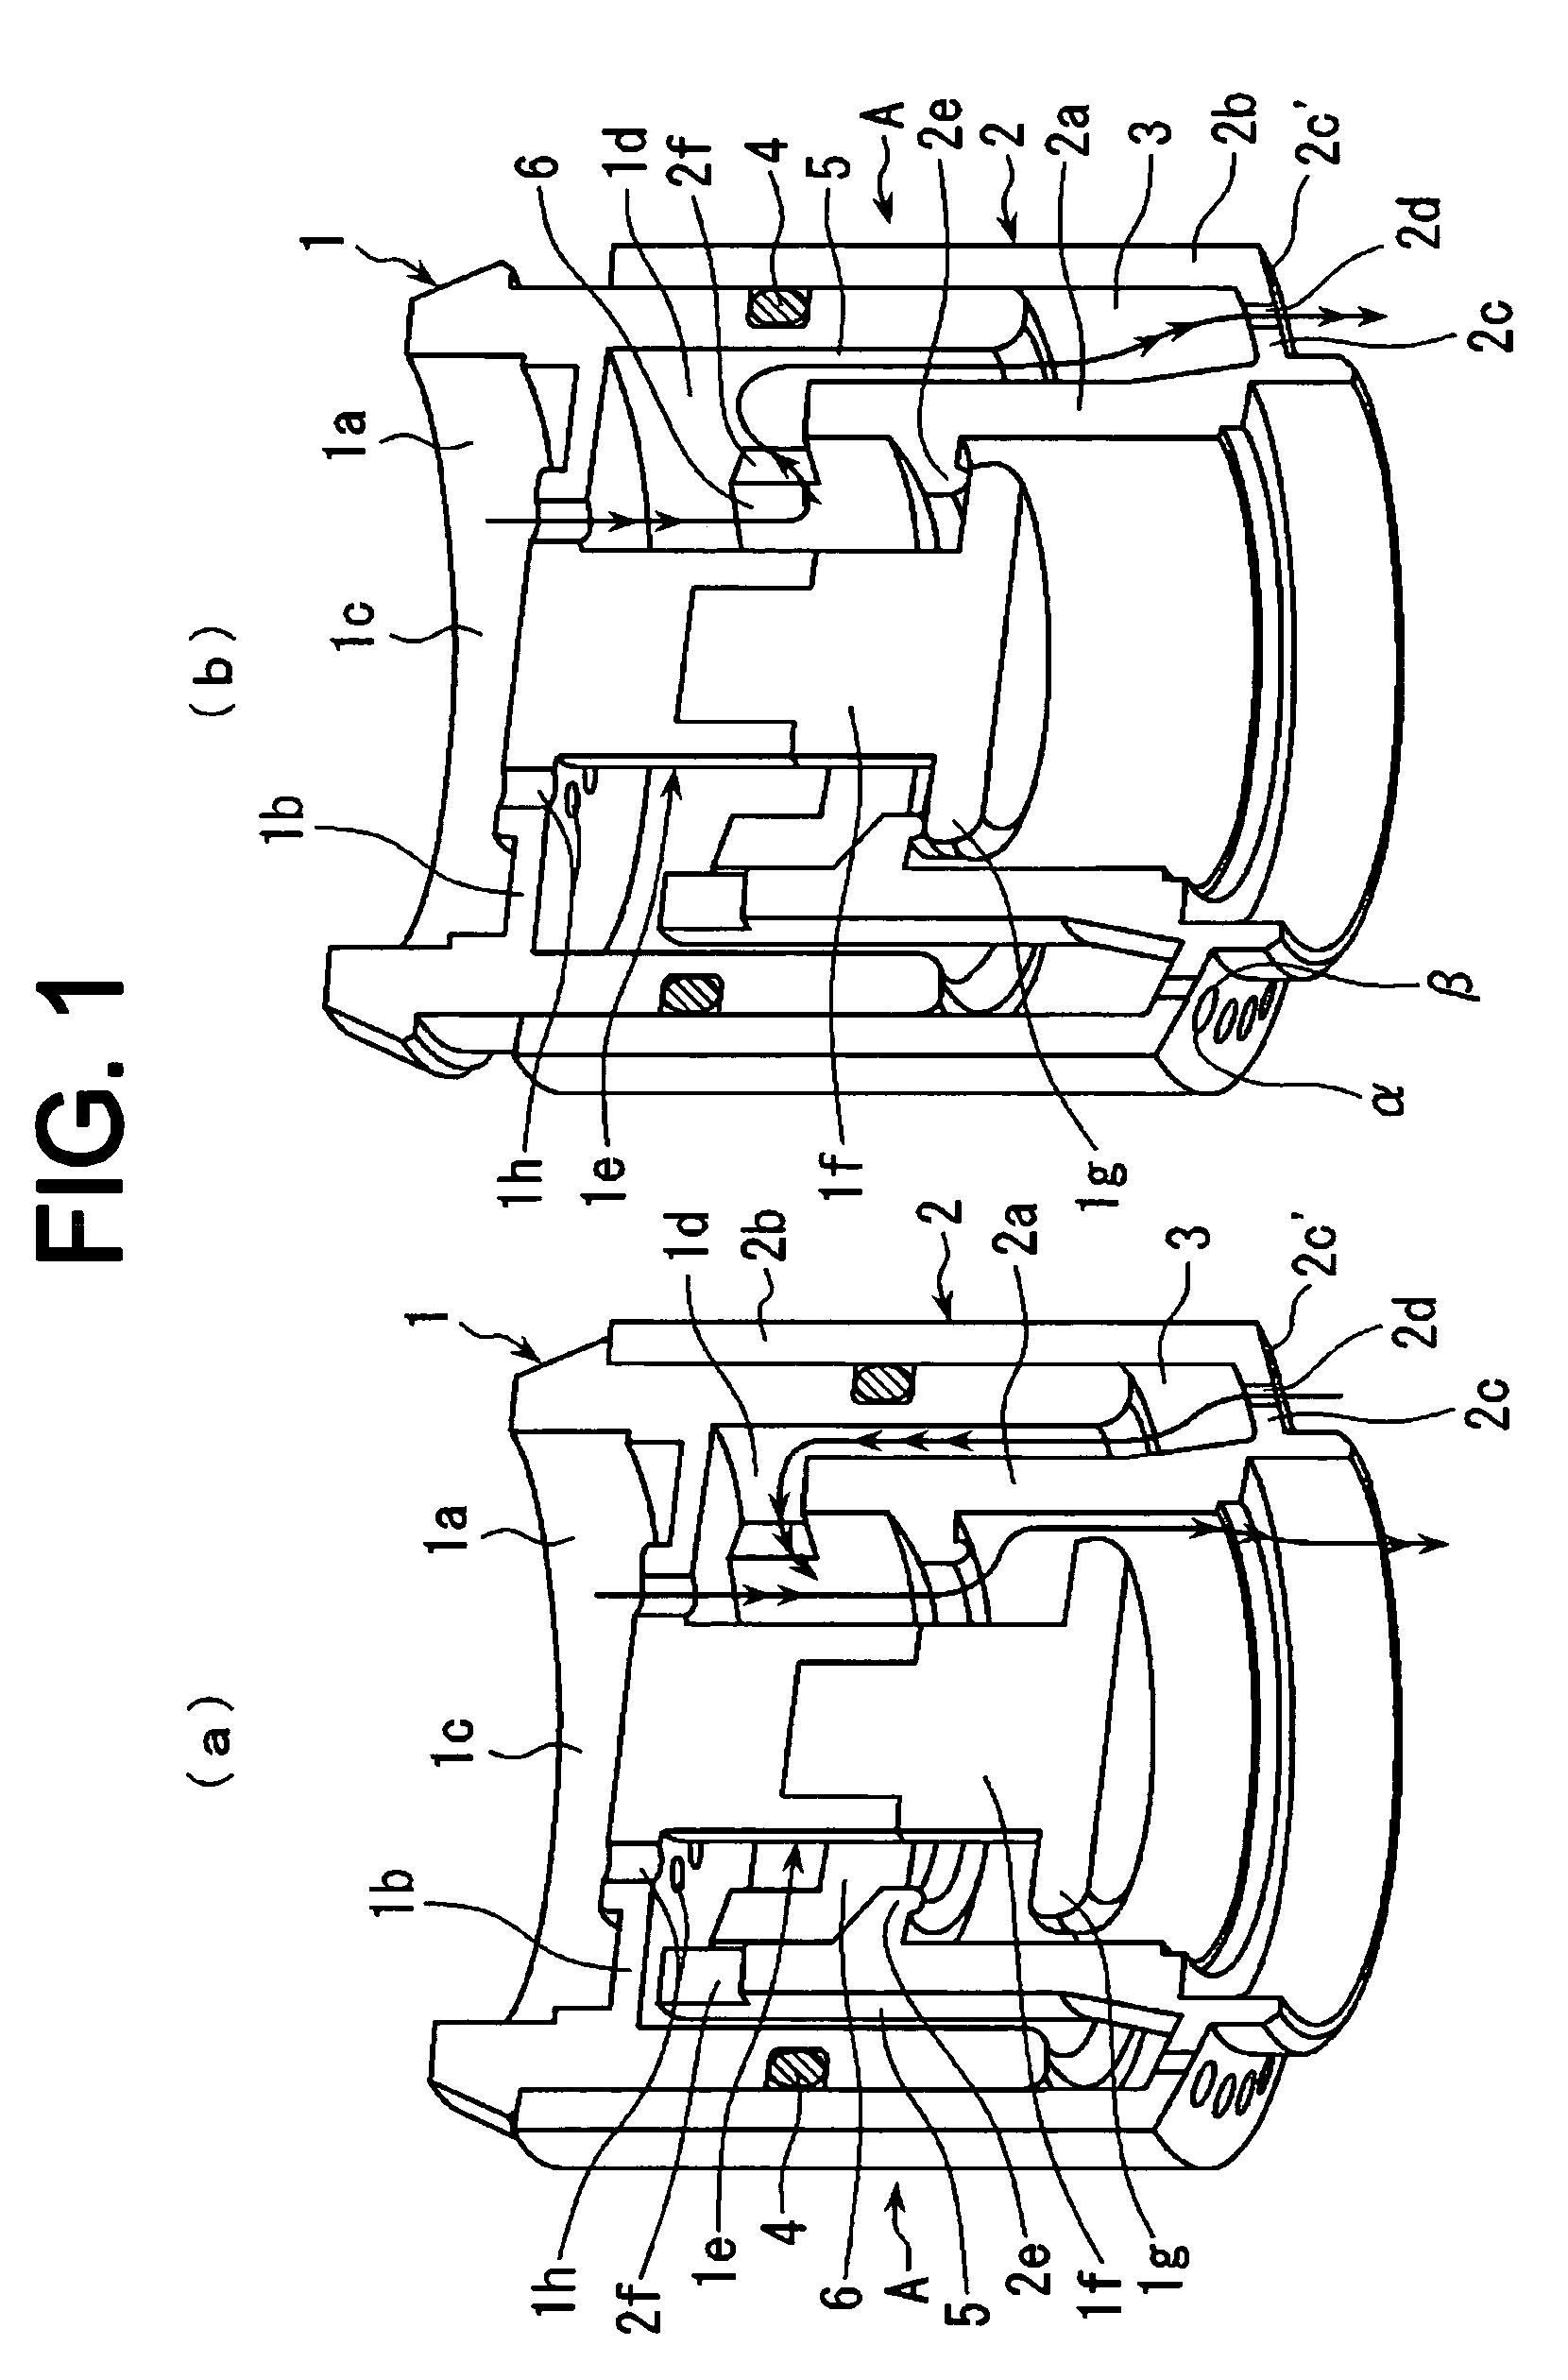 Water discharge switching device